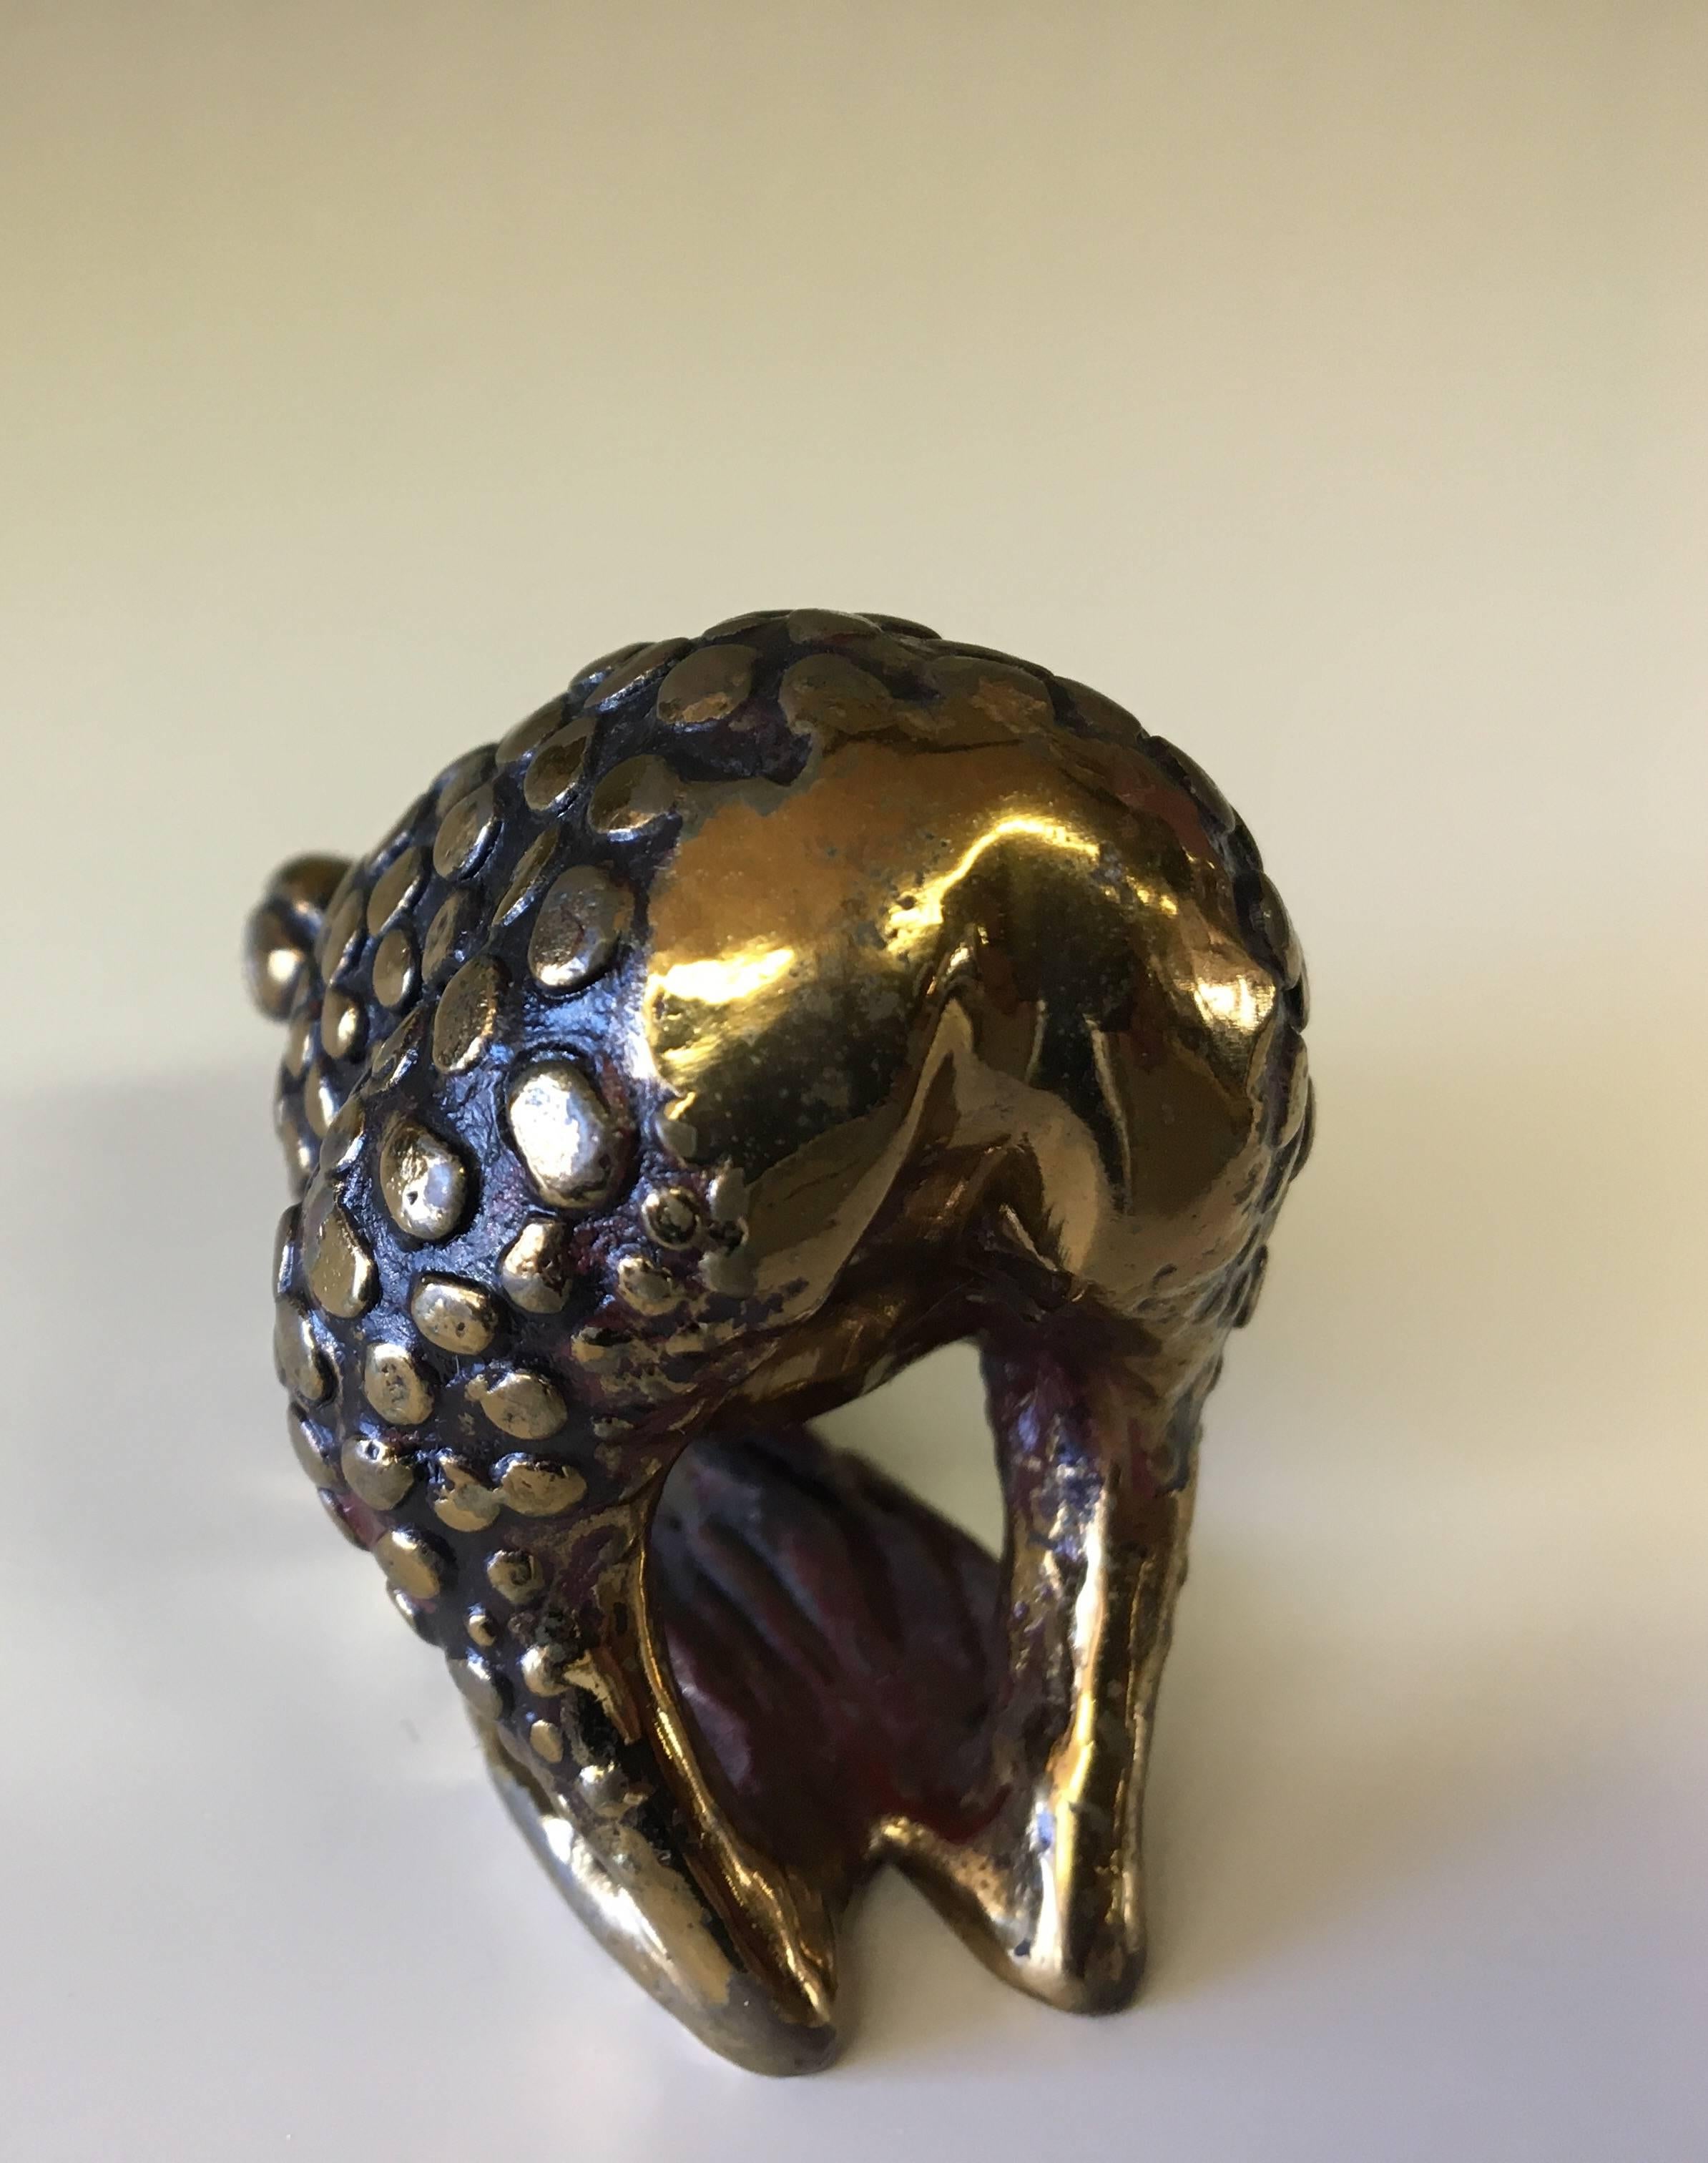 Rare and unique miniature sculpture of a frog signed and numbered, by California artist Joseph Addotta, 24-karat gold-plated over bronze signed and numbered.